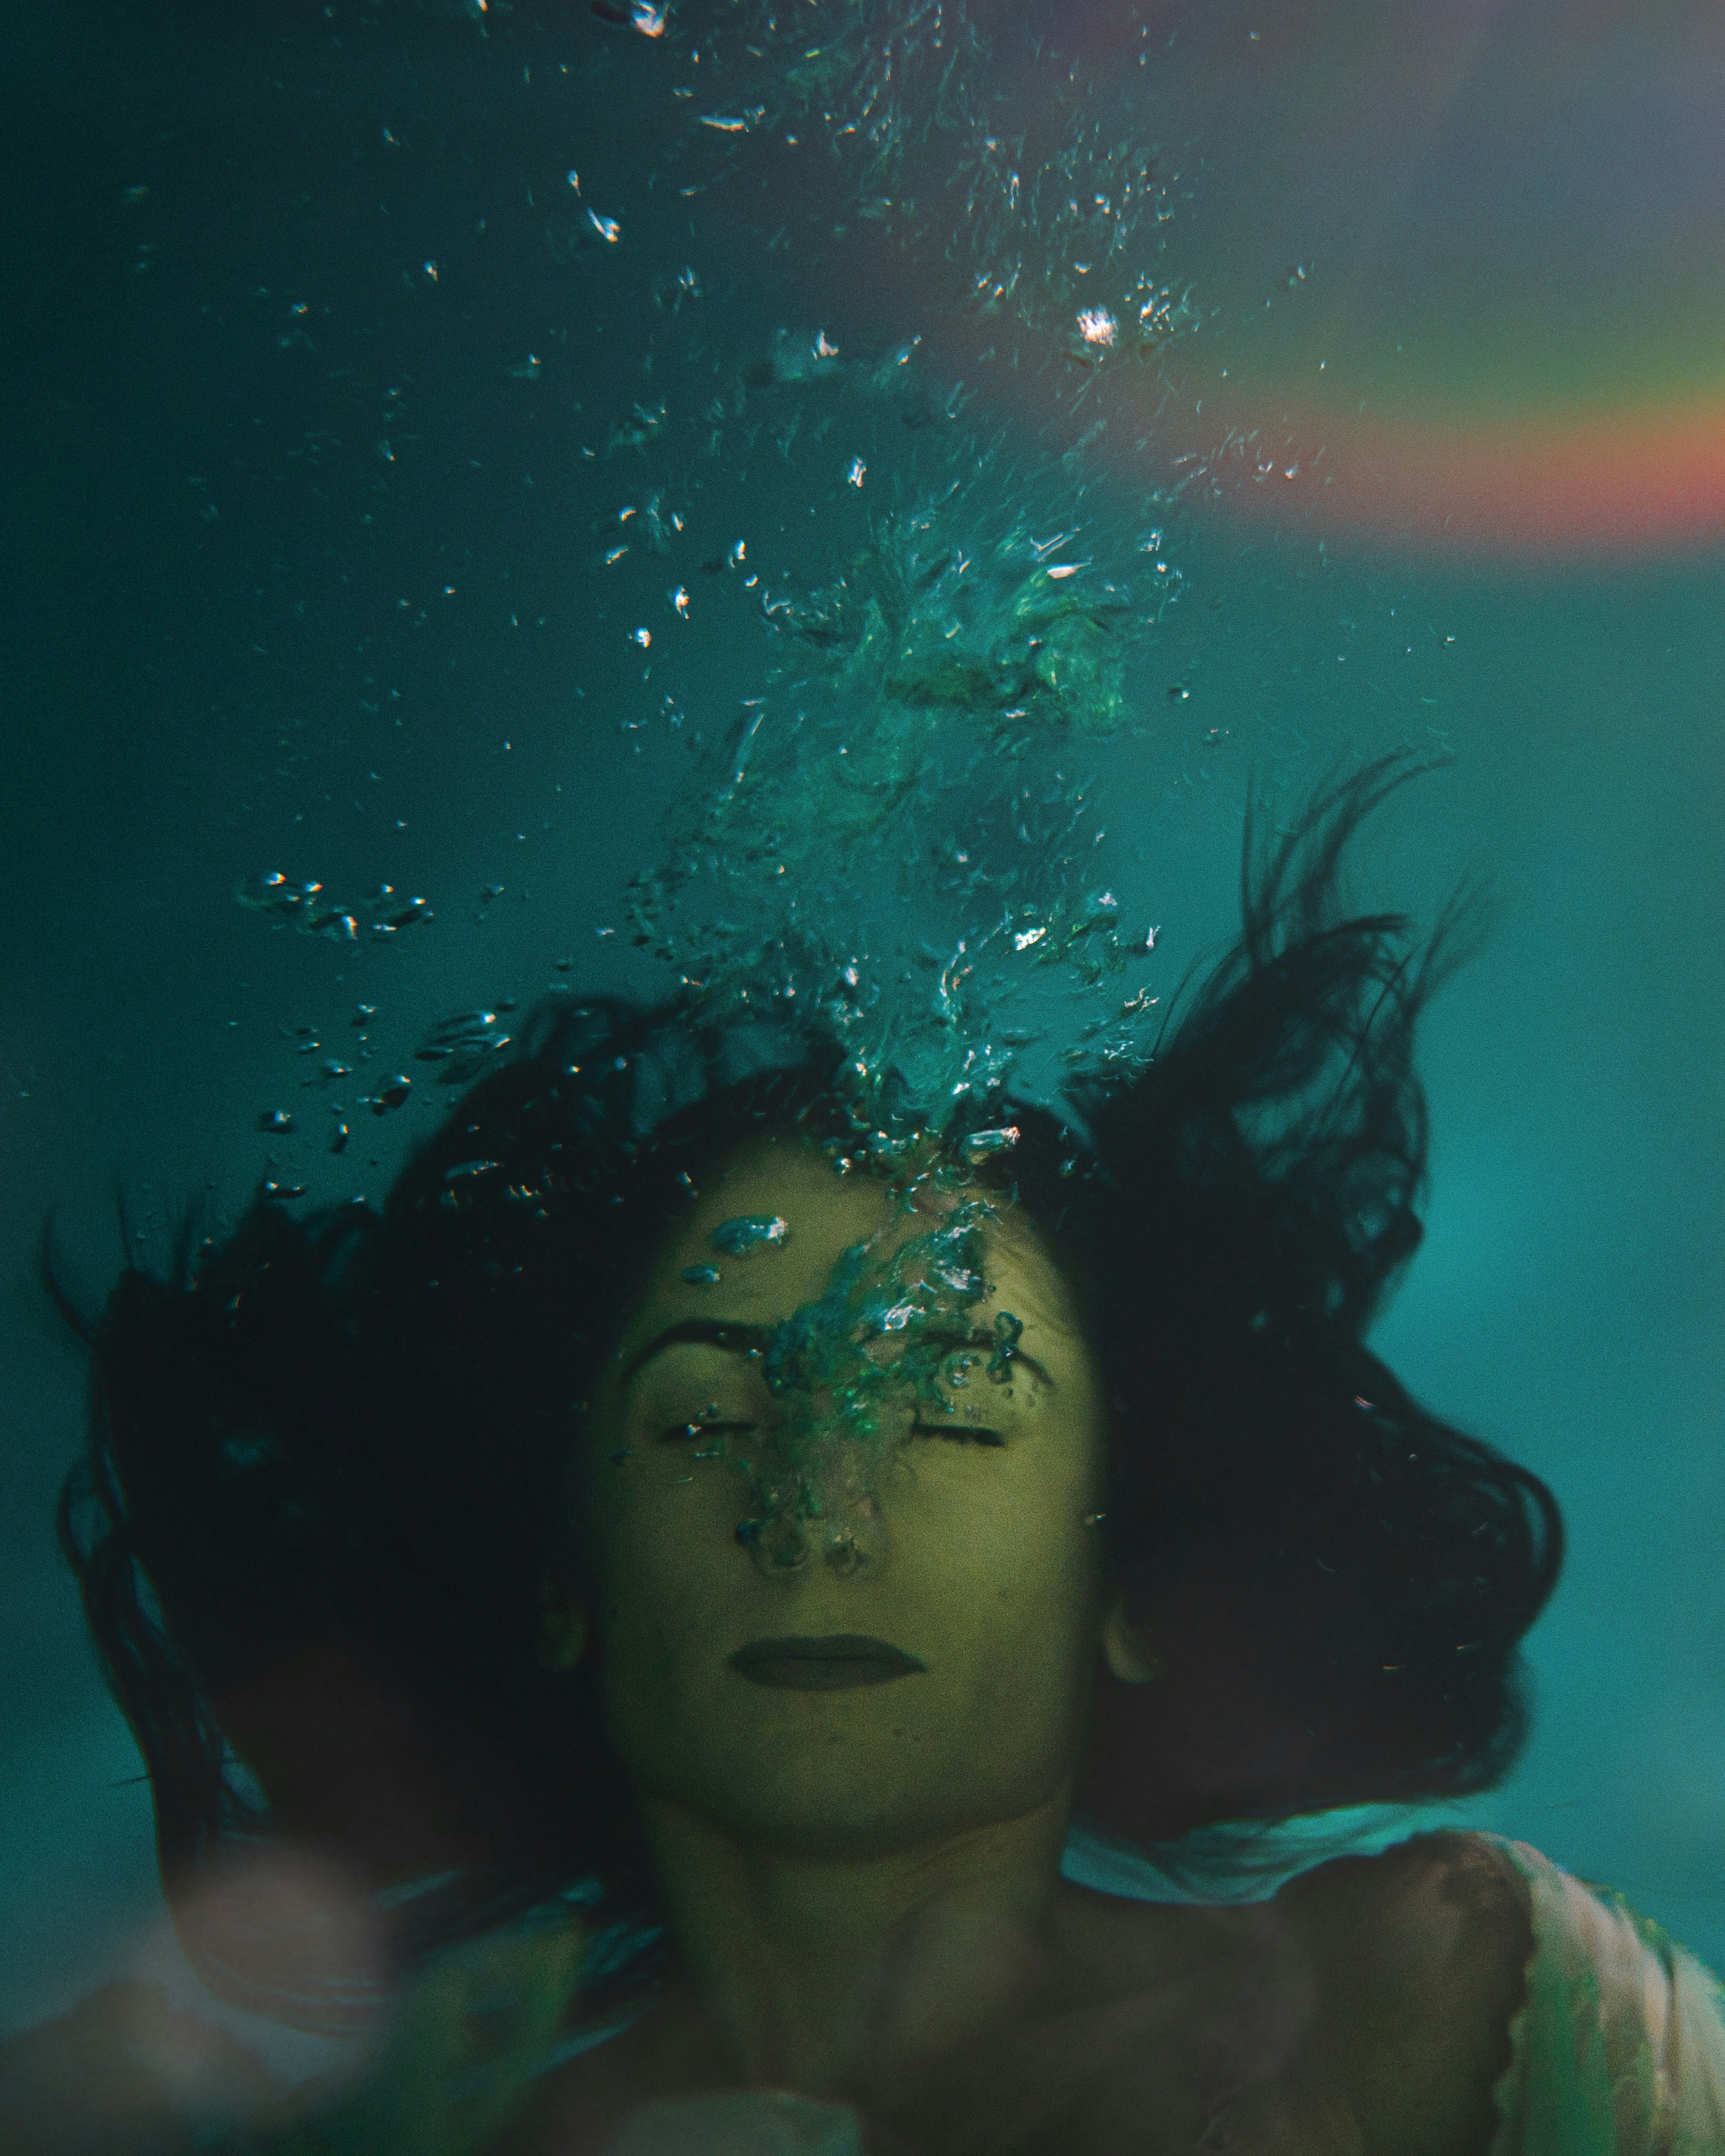 camille barber add woman underwater in tank photo